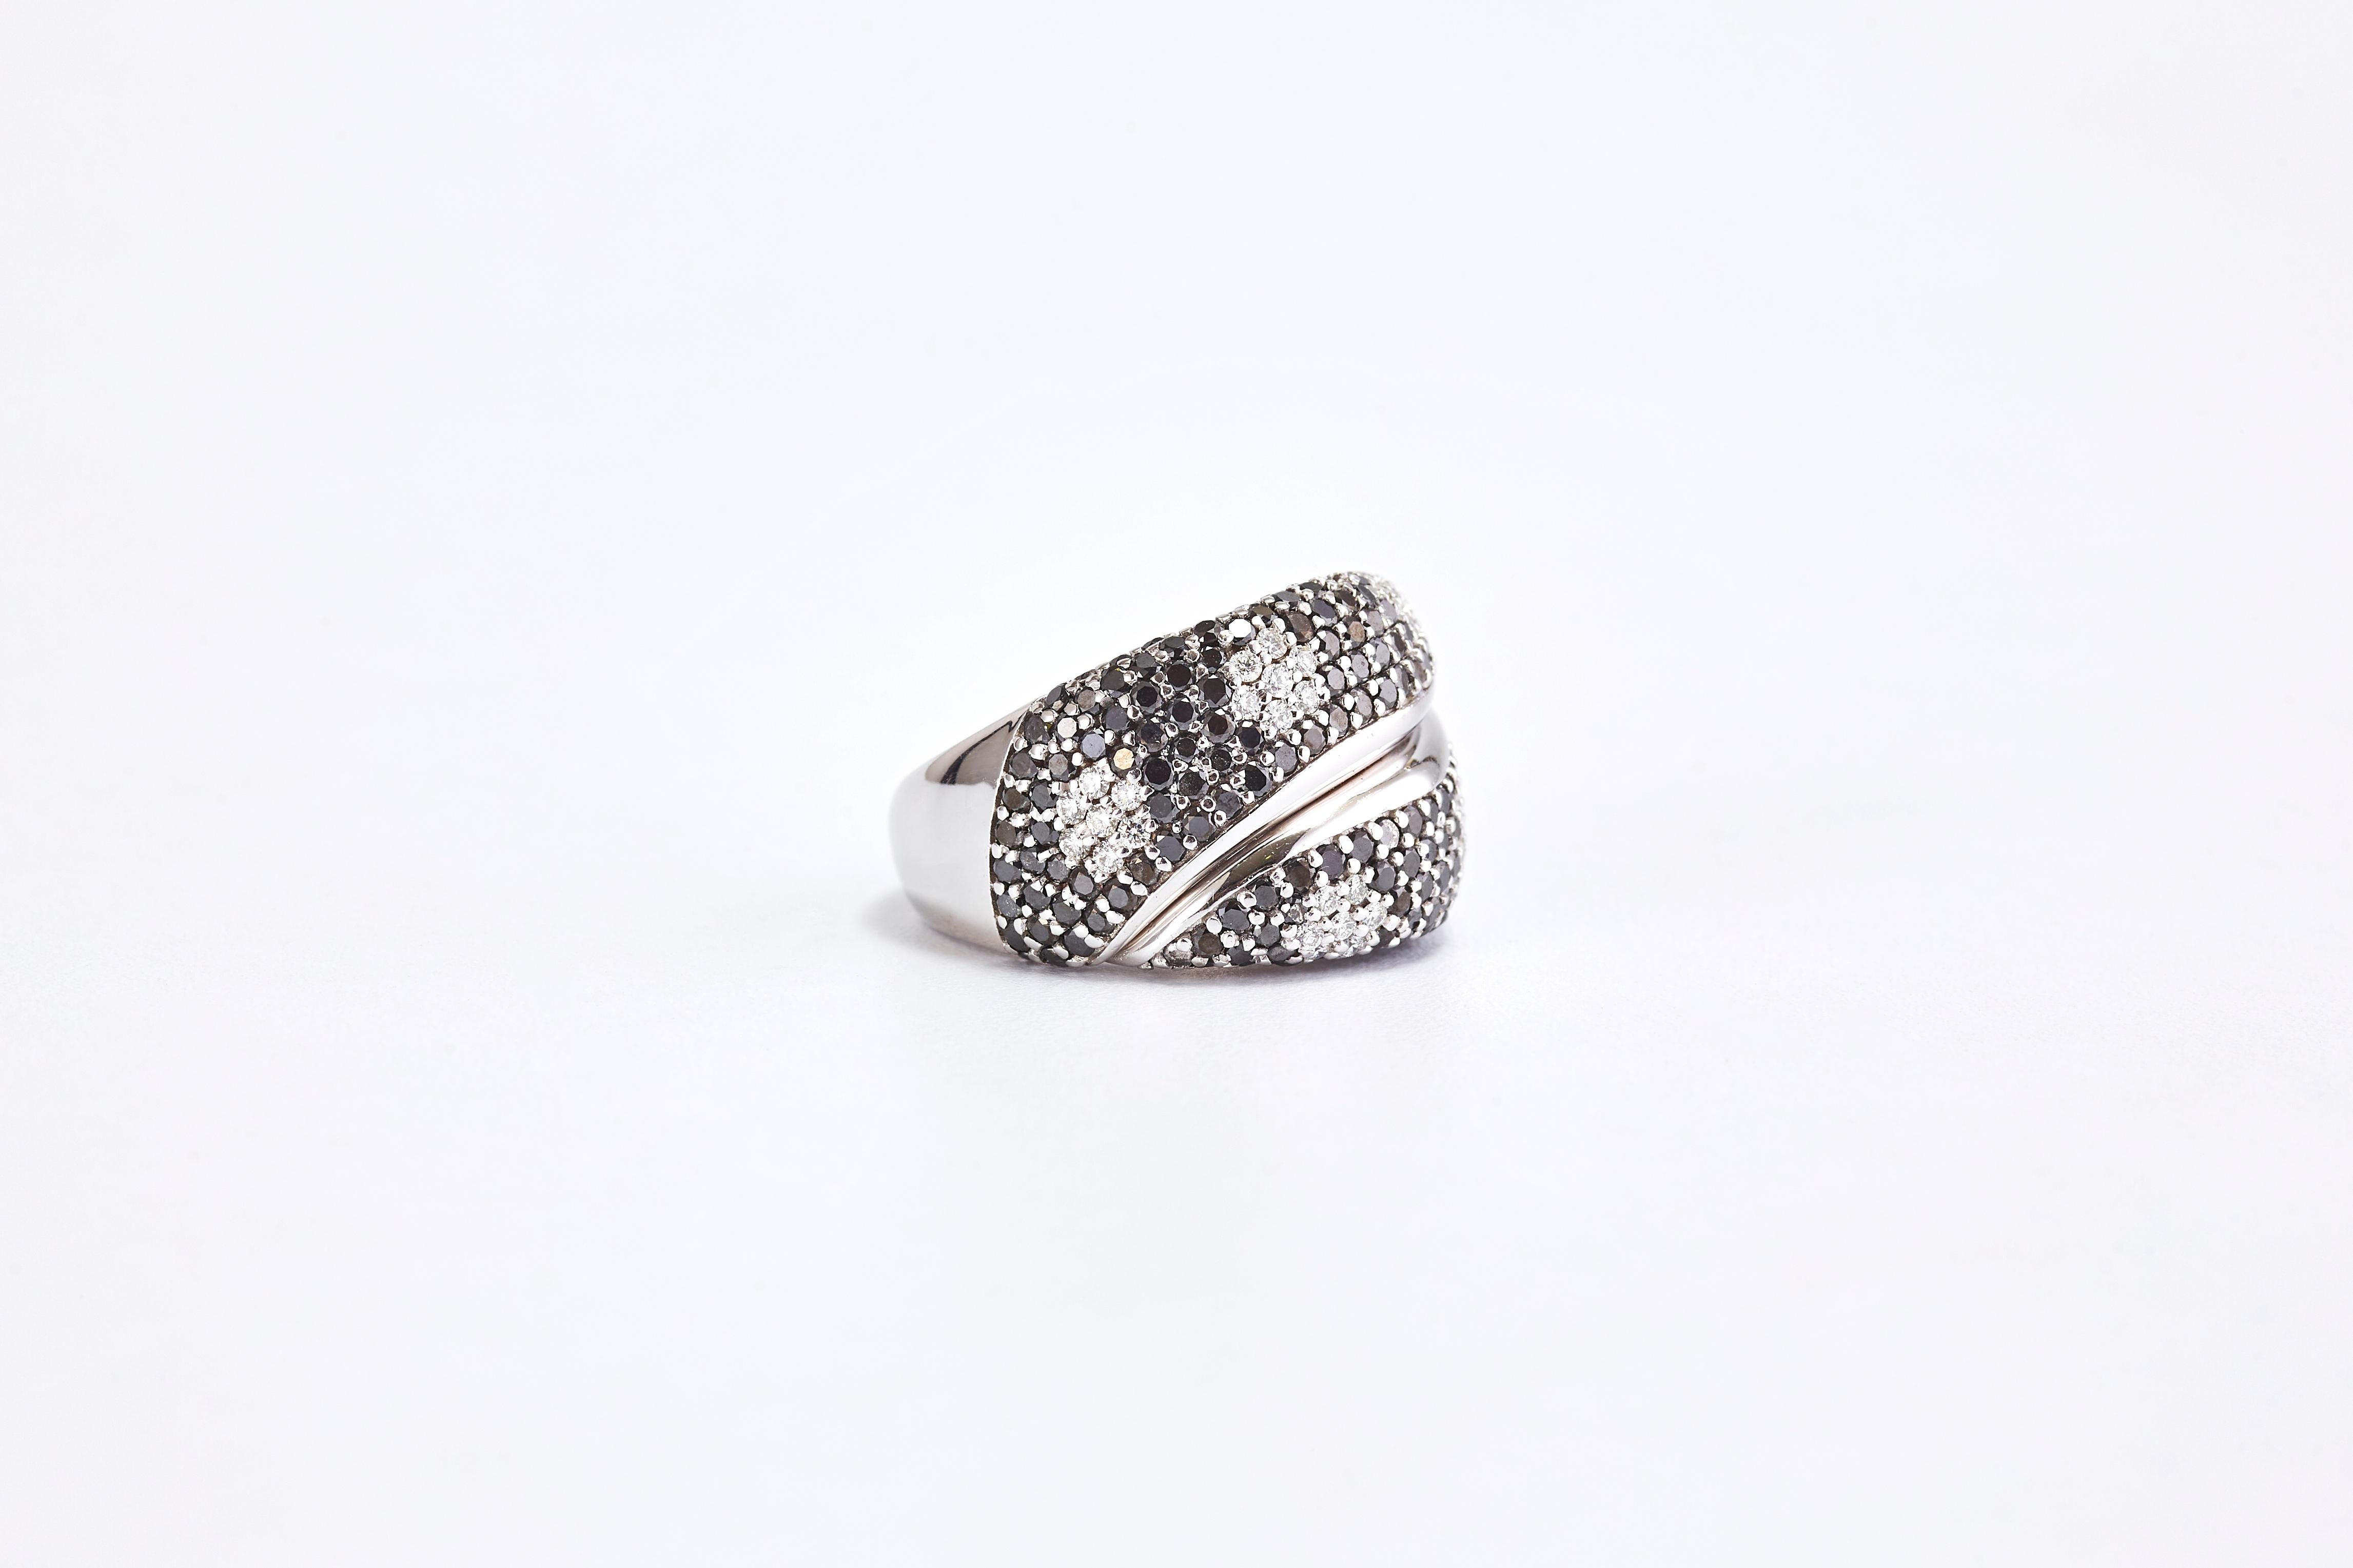 White Gold Black and White Diamond Pave Flowers Band Ring

Amazing white gold ring with high quality round cut diamonds diamonds. 
The ring has a beautiful pave of black diamonds and 6 groups of white diamonds that each forms a flower.
Black